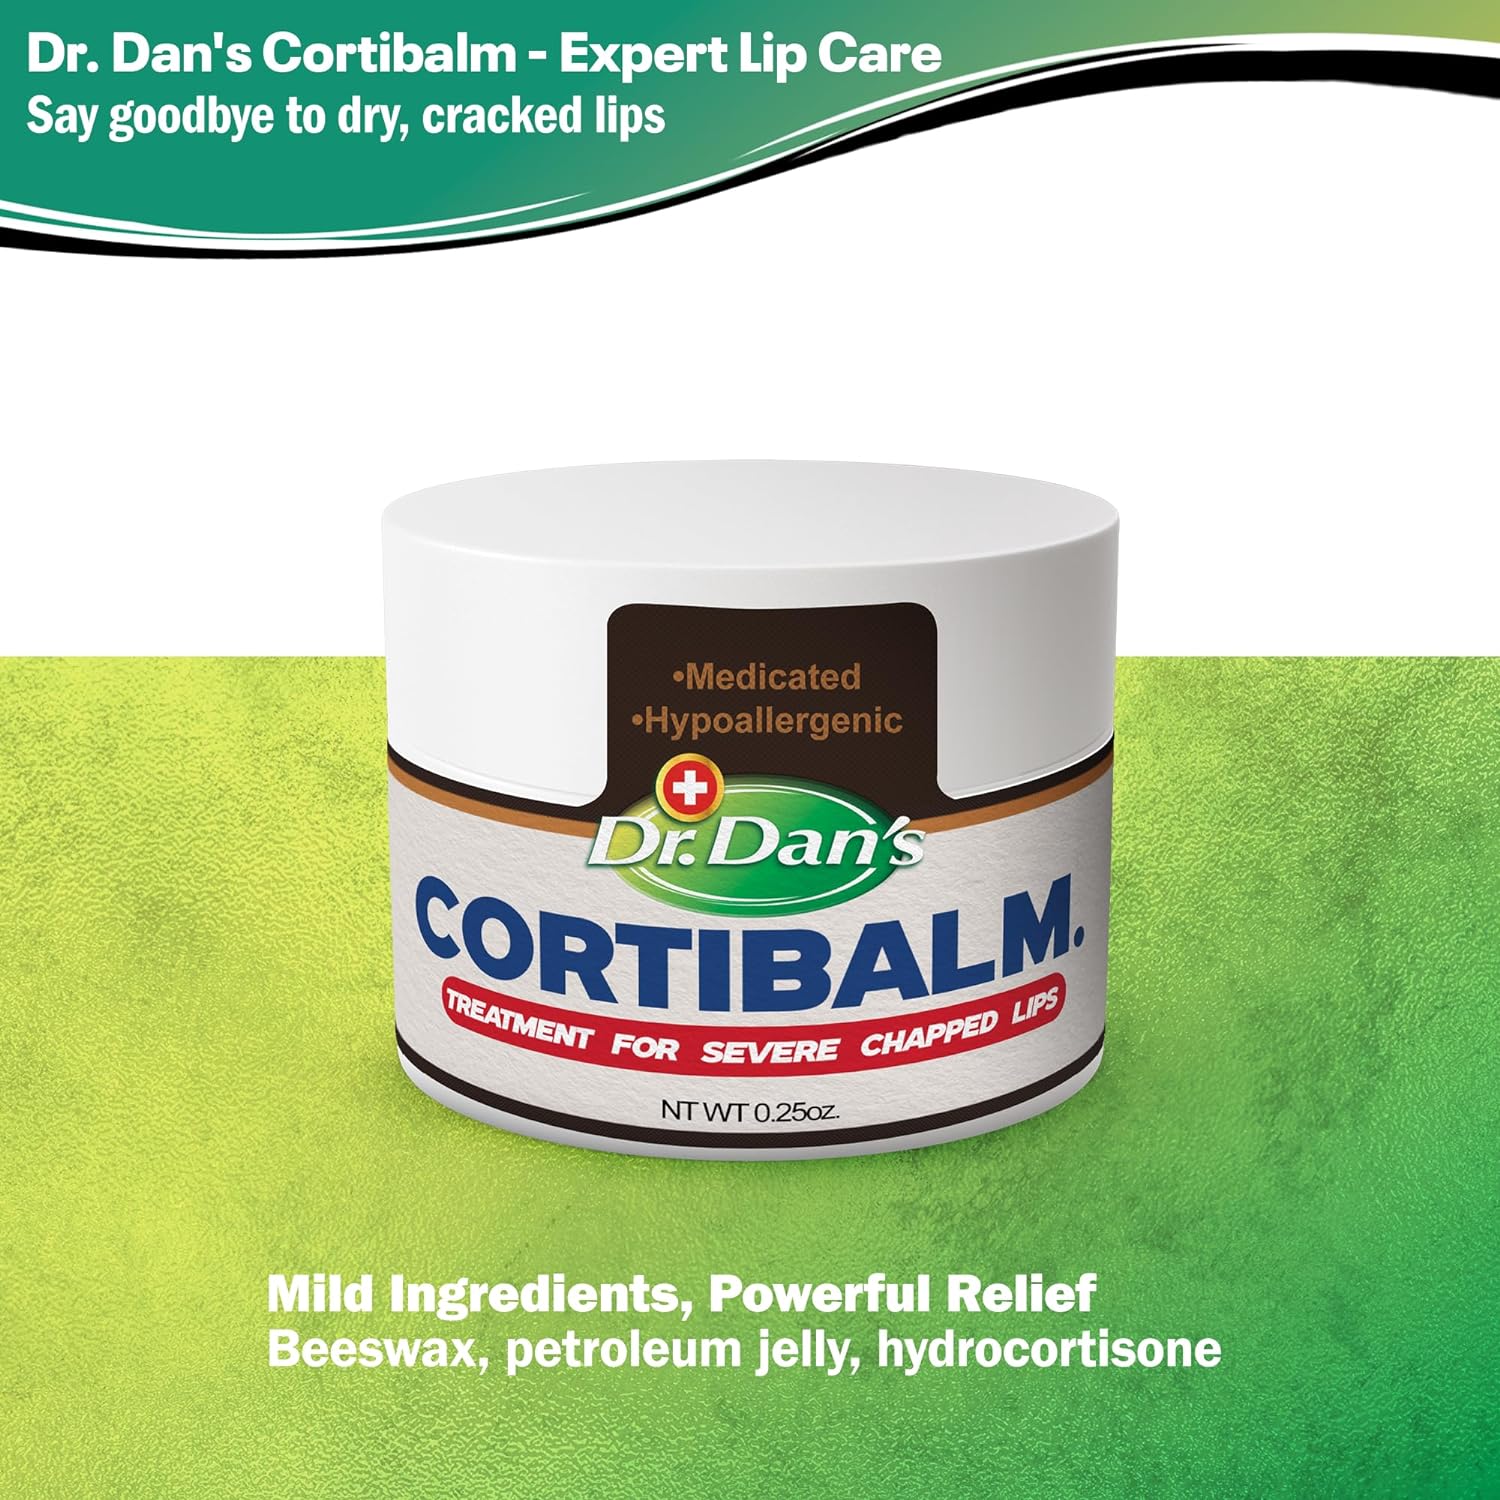 Dr. Dan's Cortibalm Jars-3 Pack- for Dry Cracked Lips - Healing Lip Balm Jar for Severely Chapped Lips - Designed for Men, Women and Children - : Lip Balms And Moisturizers : Beauty & Personal Care